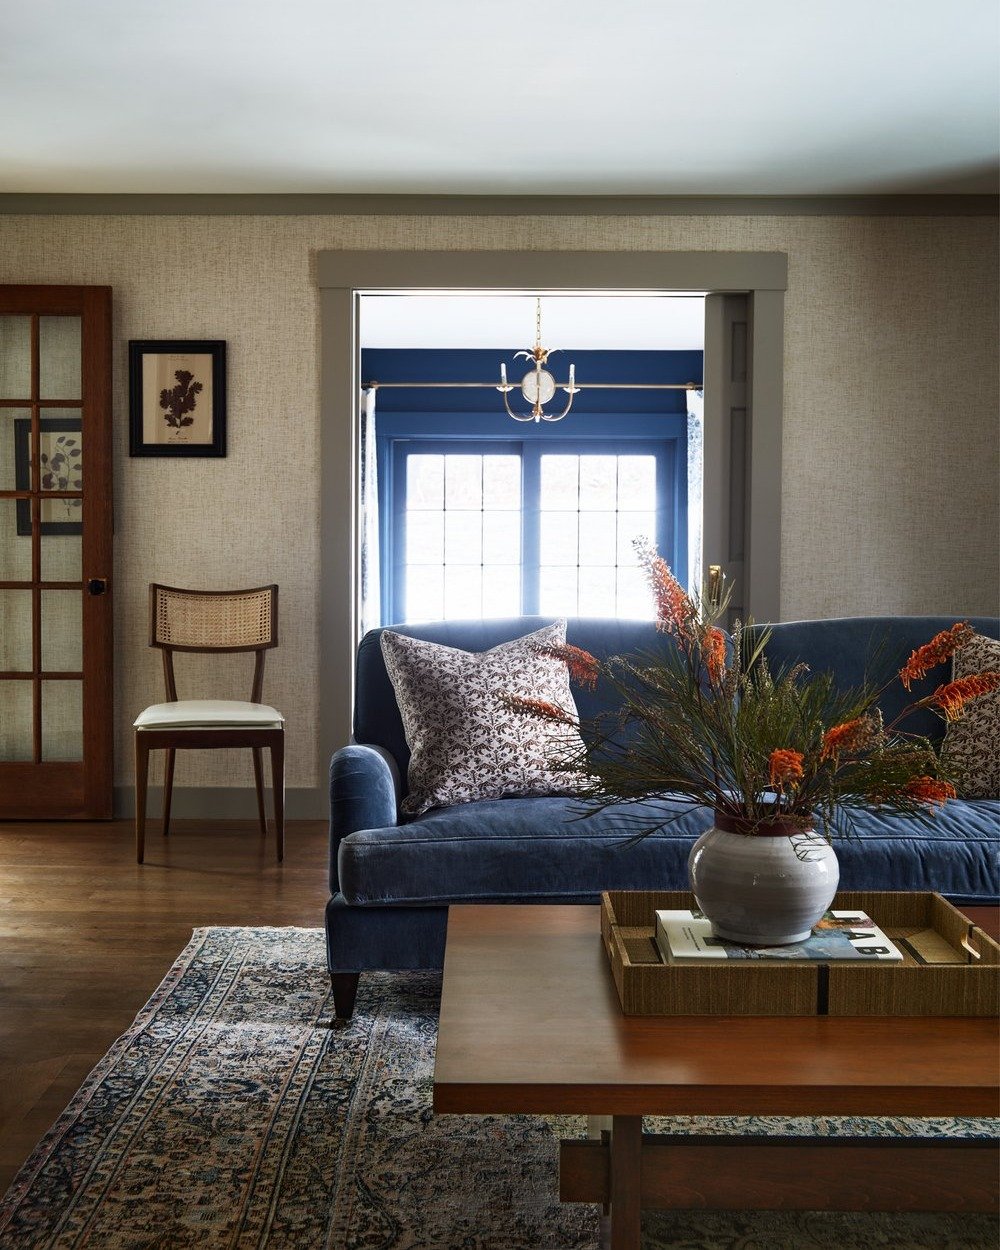 In the Dover Farmhouse project, I used rich blues against a more neutral background to uplift the overall aesthetic of this living space. Paired with colorful flowers, this room is made for cozy evenings or hosting for friends and family.

Photo: @ja